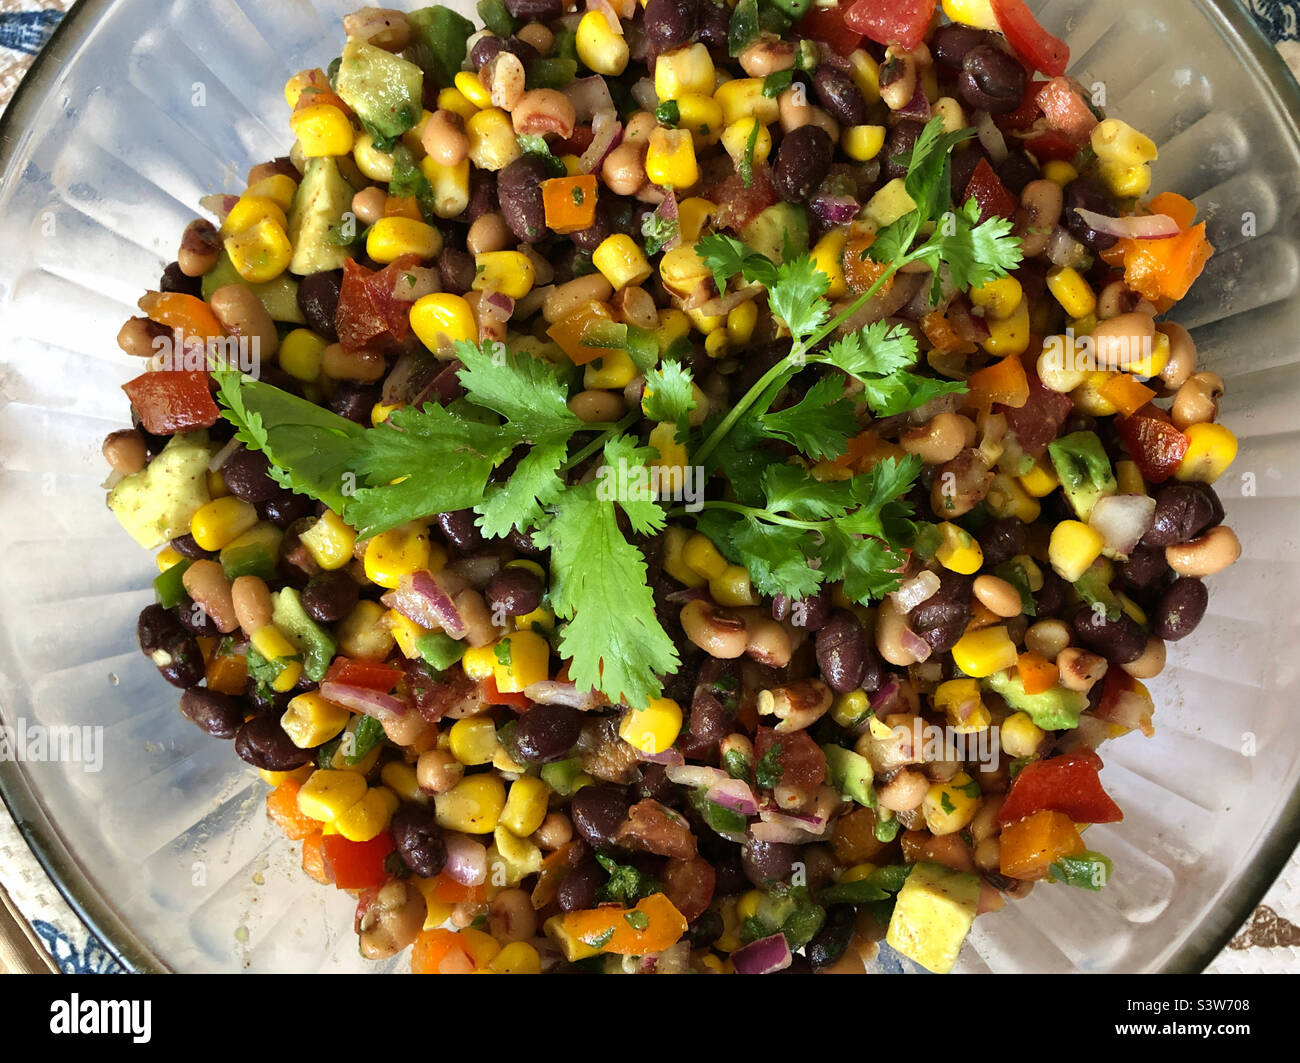 Cowboy caviar Tex-Mex dip with a savory dressing of olive oil, lime juice, honey and spices. Stock Photo